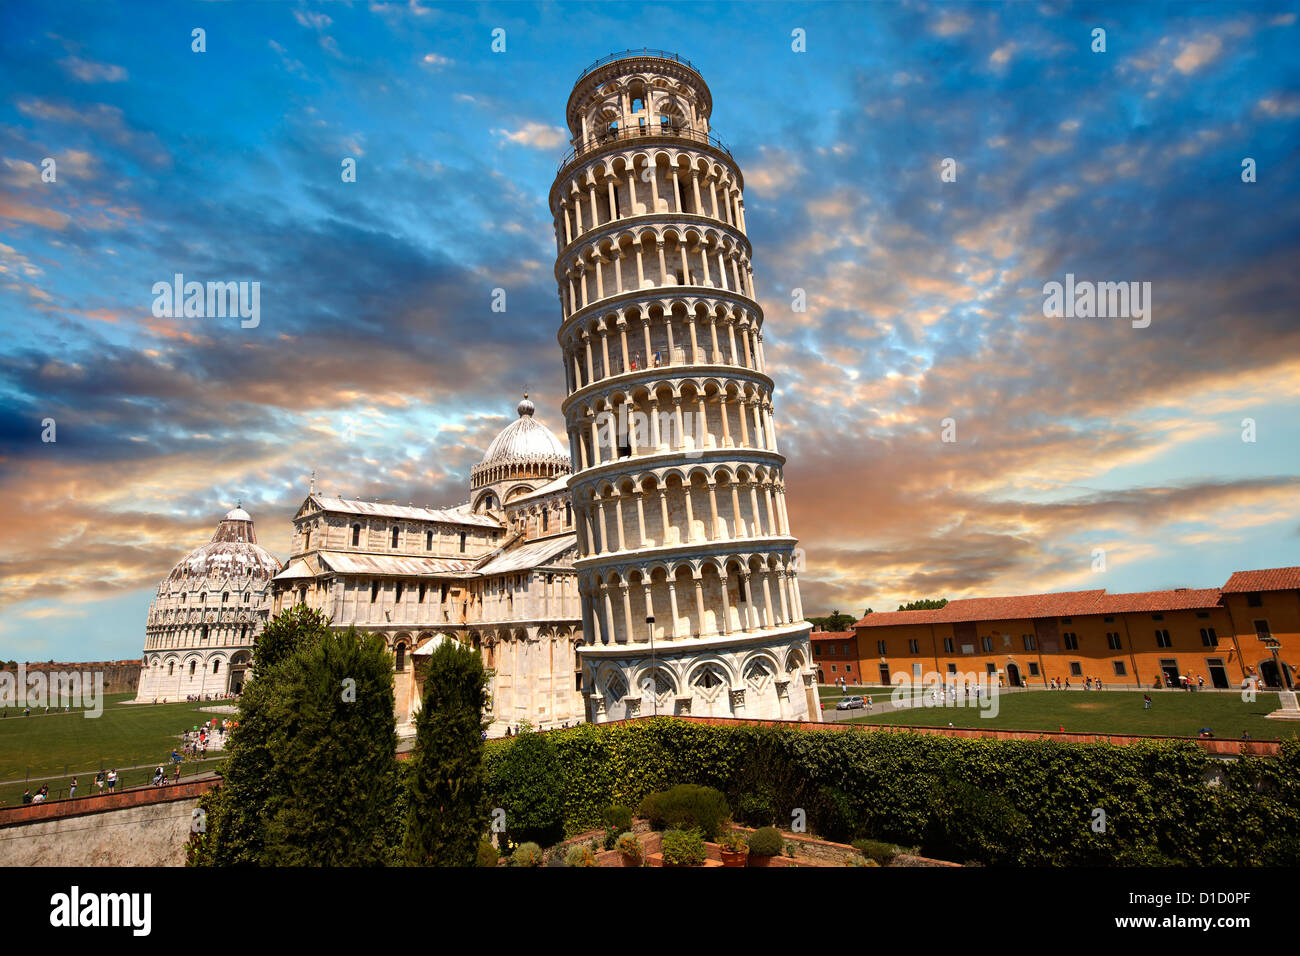 The Leaning Tower Of Pisa and the duomo at sunset, Italy Stock Photo